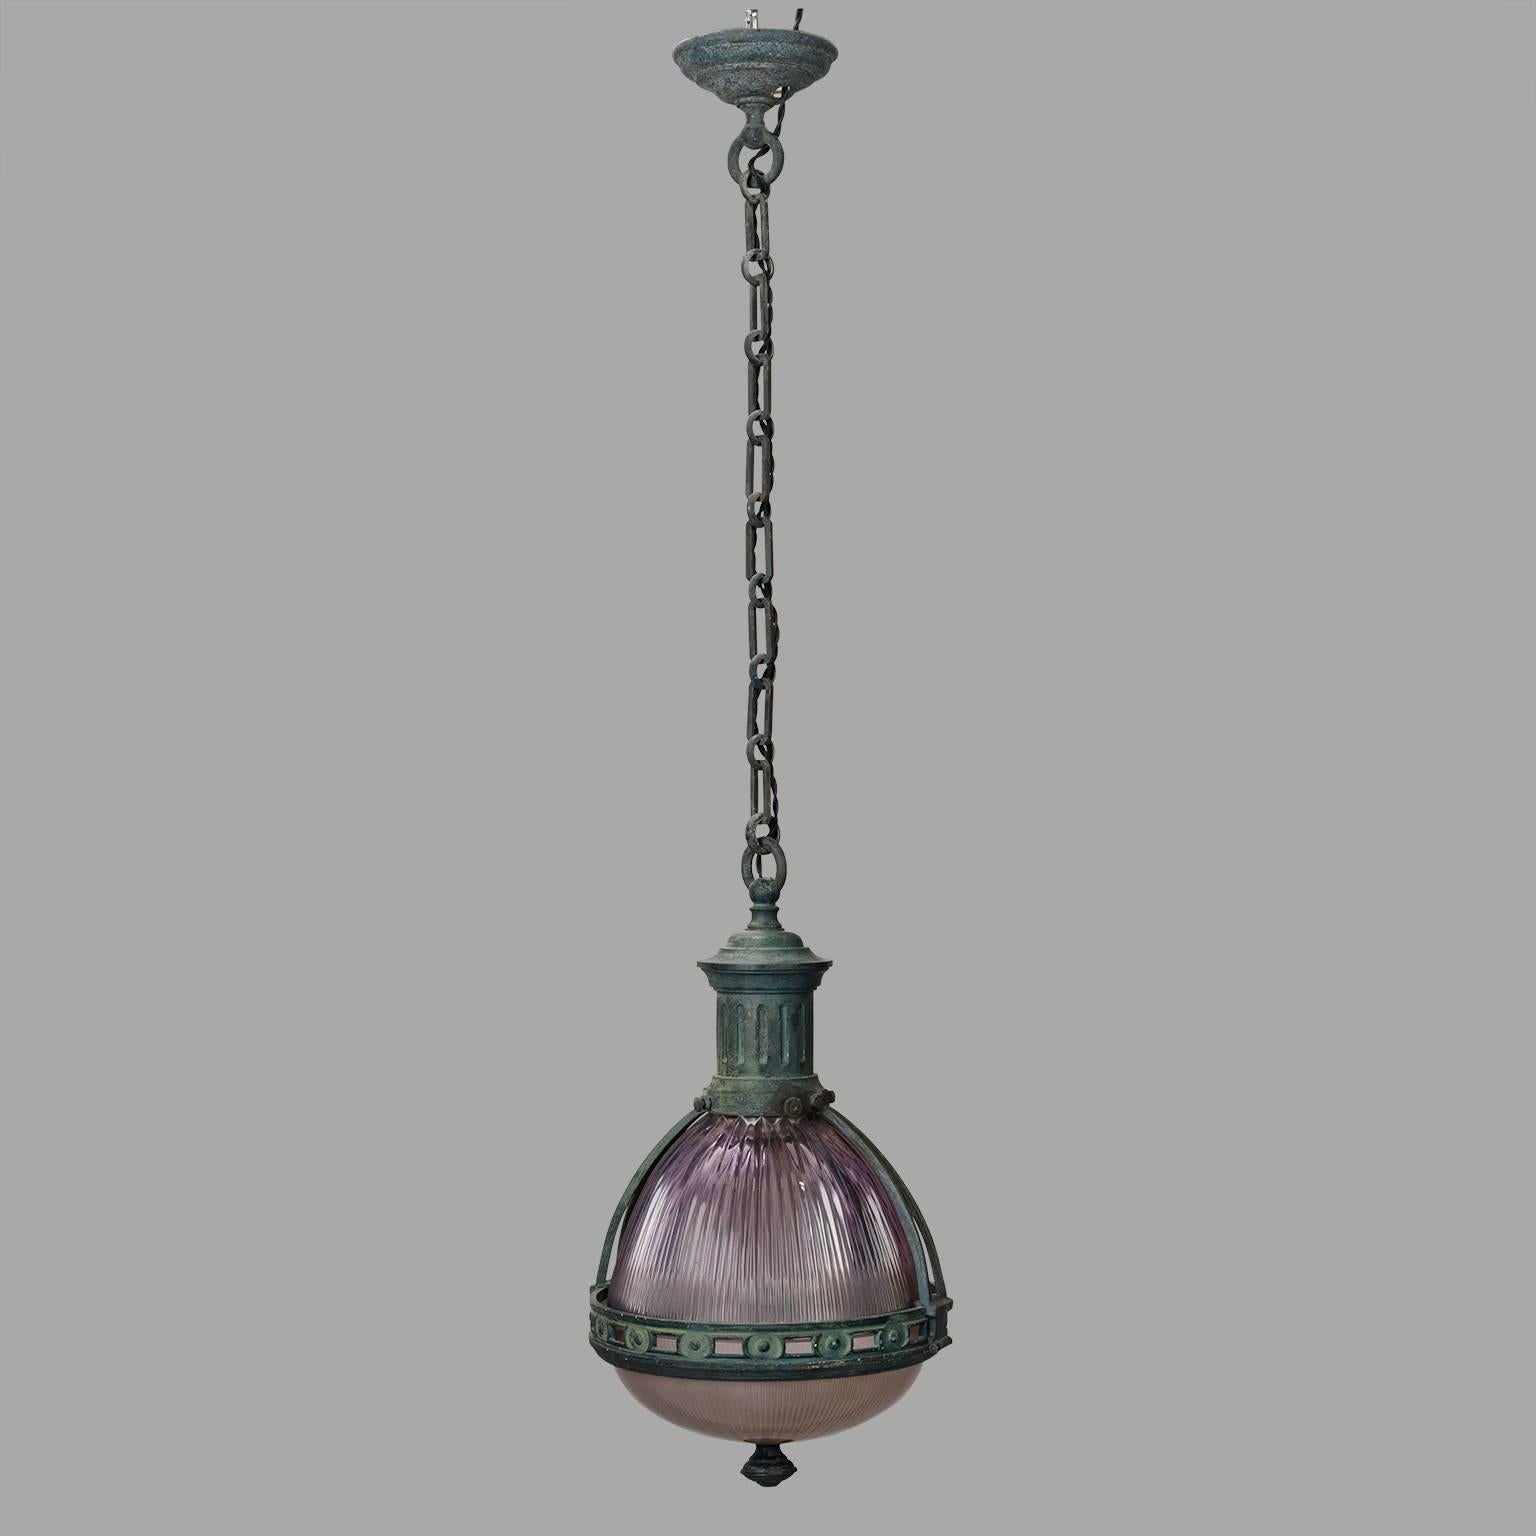 Original light violet tainted glass. The bronze is enhanced with a beautiful green gray patina. Contemporary wiring.